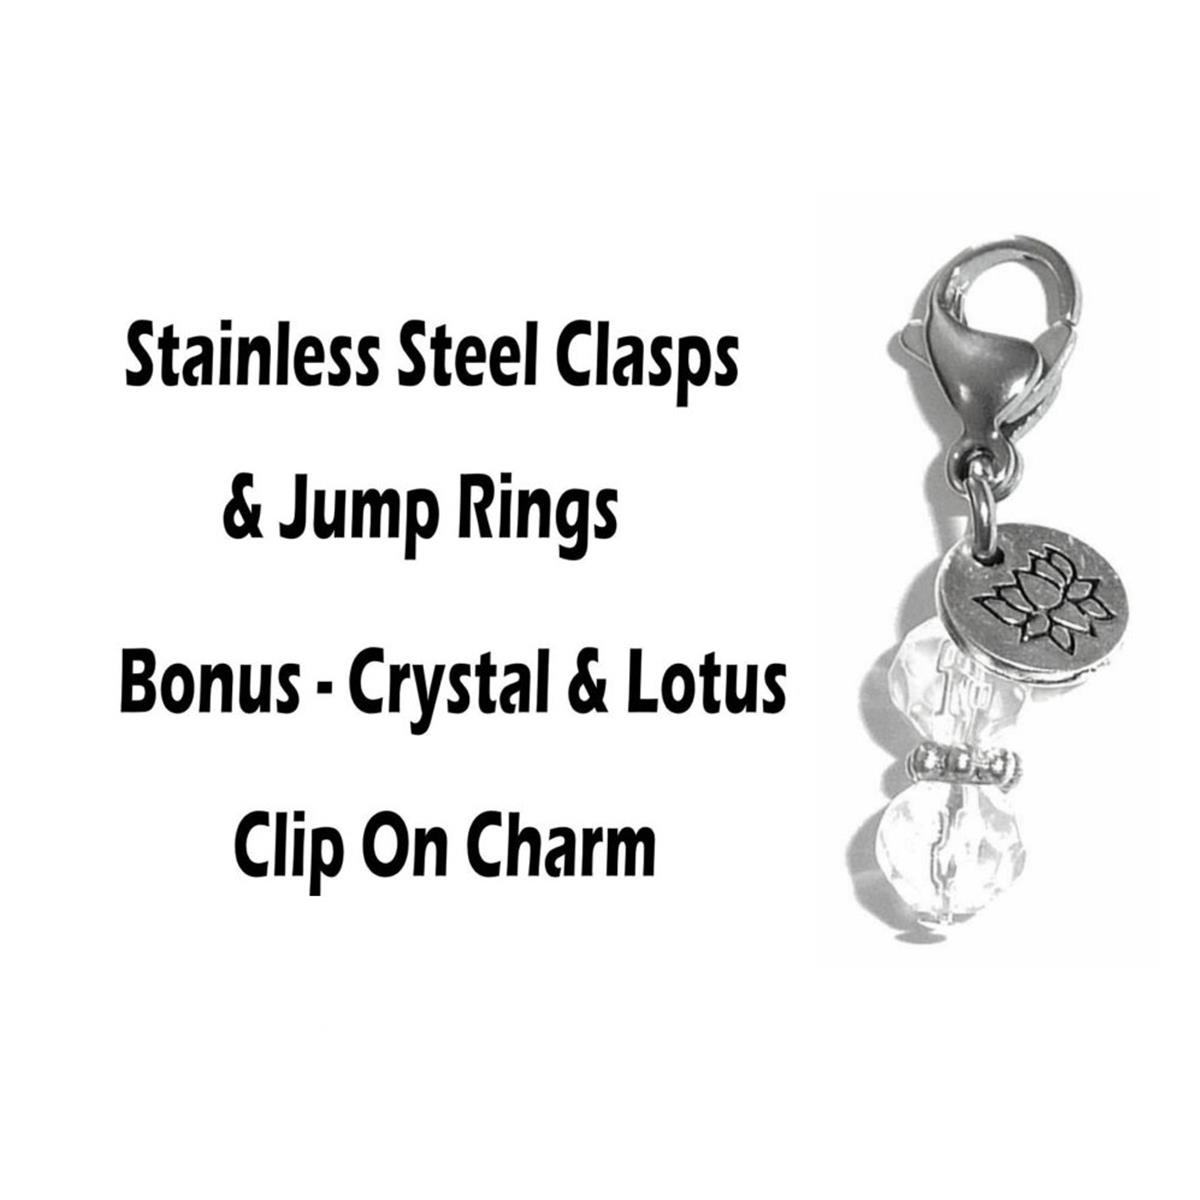 4 Pack Cancer Awareness Clip On Charms - Whimsical Charms Clip On Anywhere